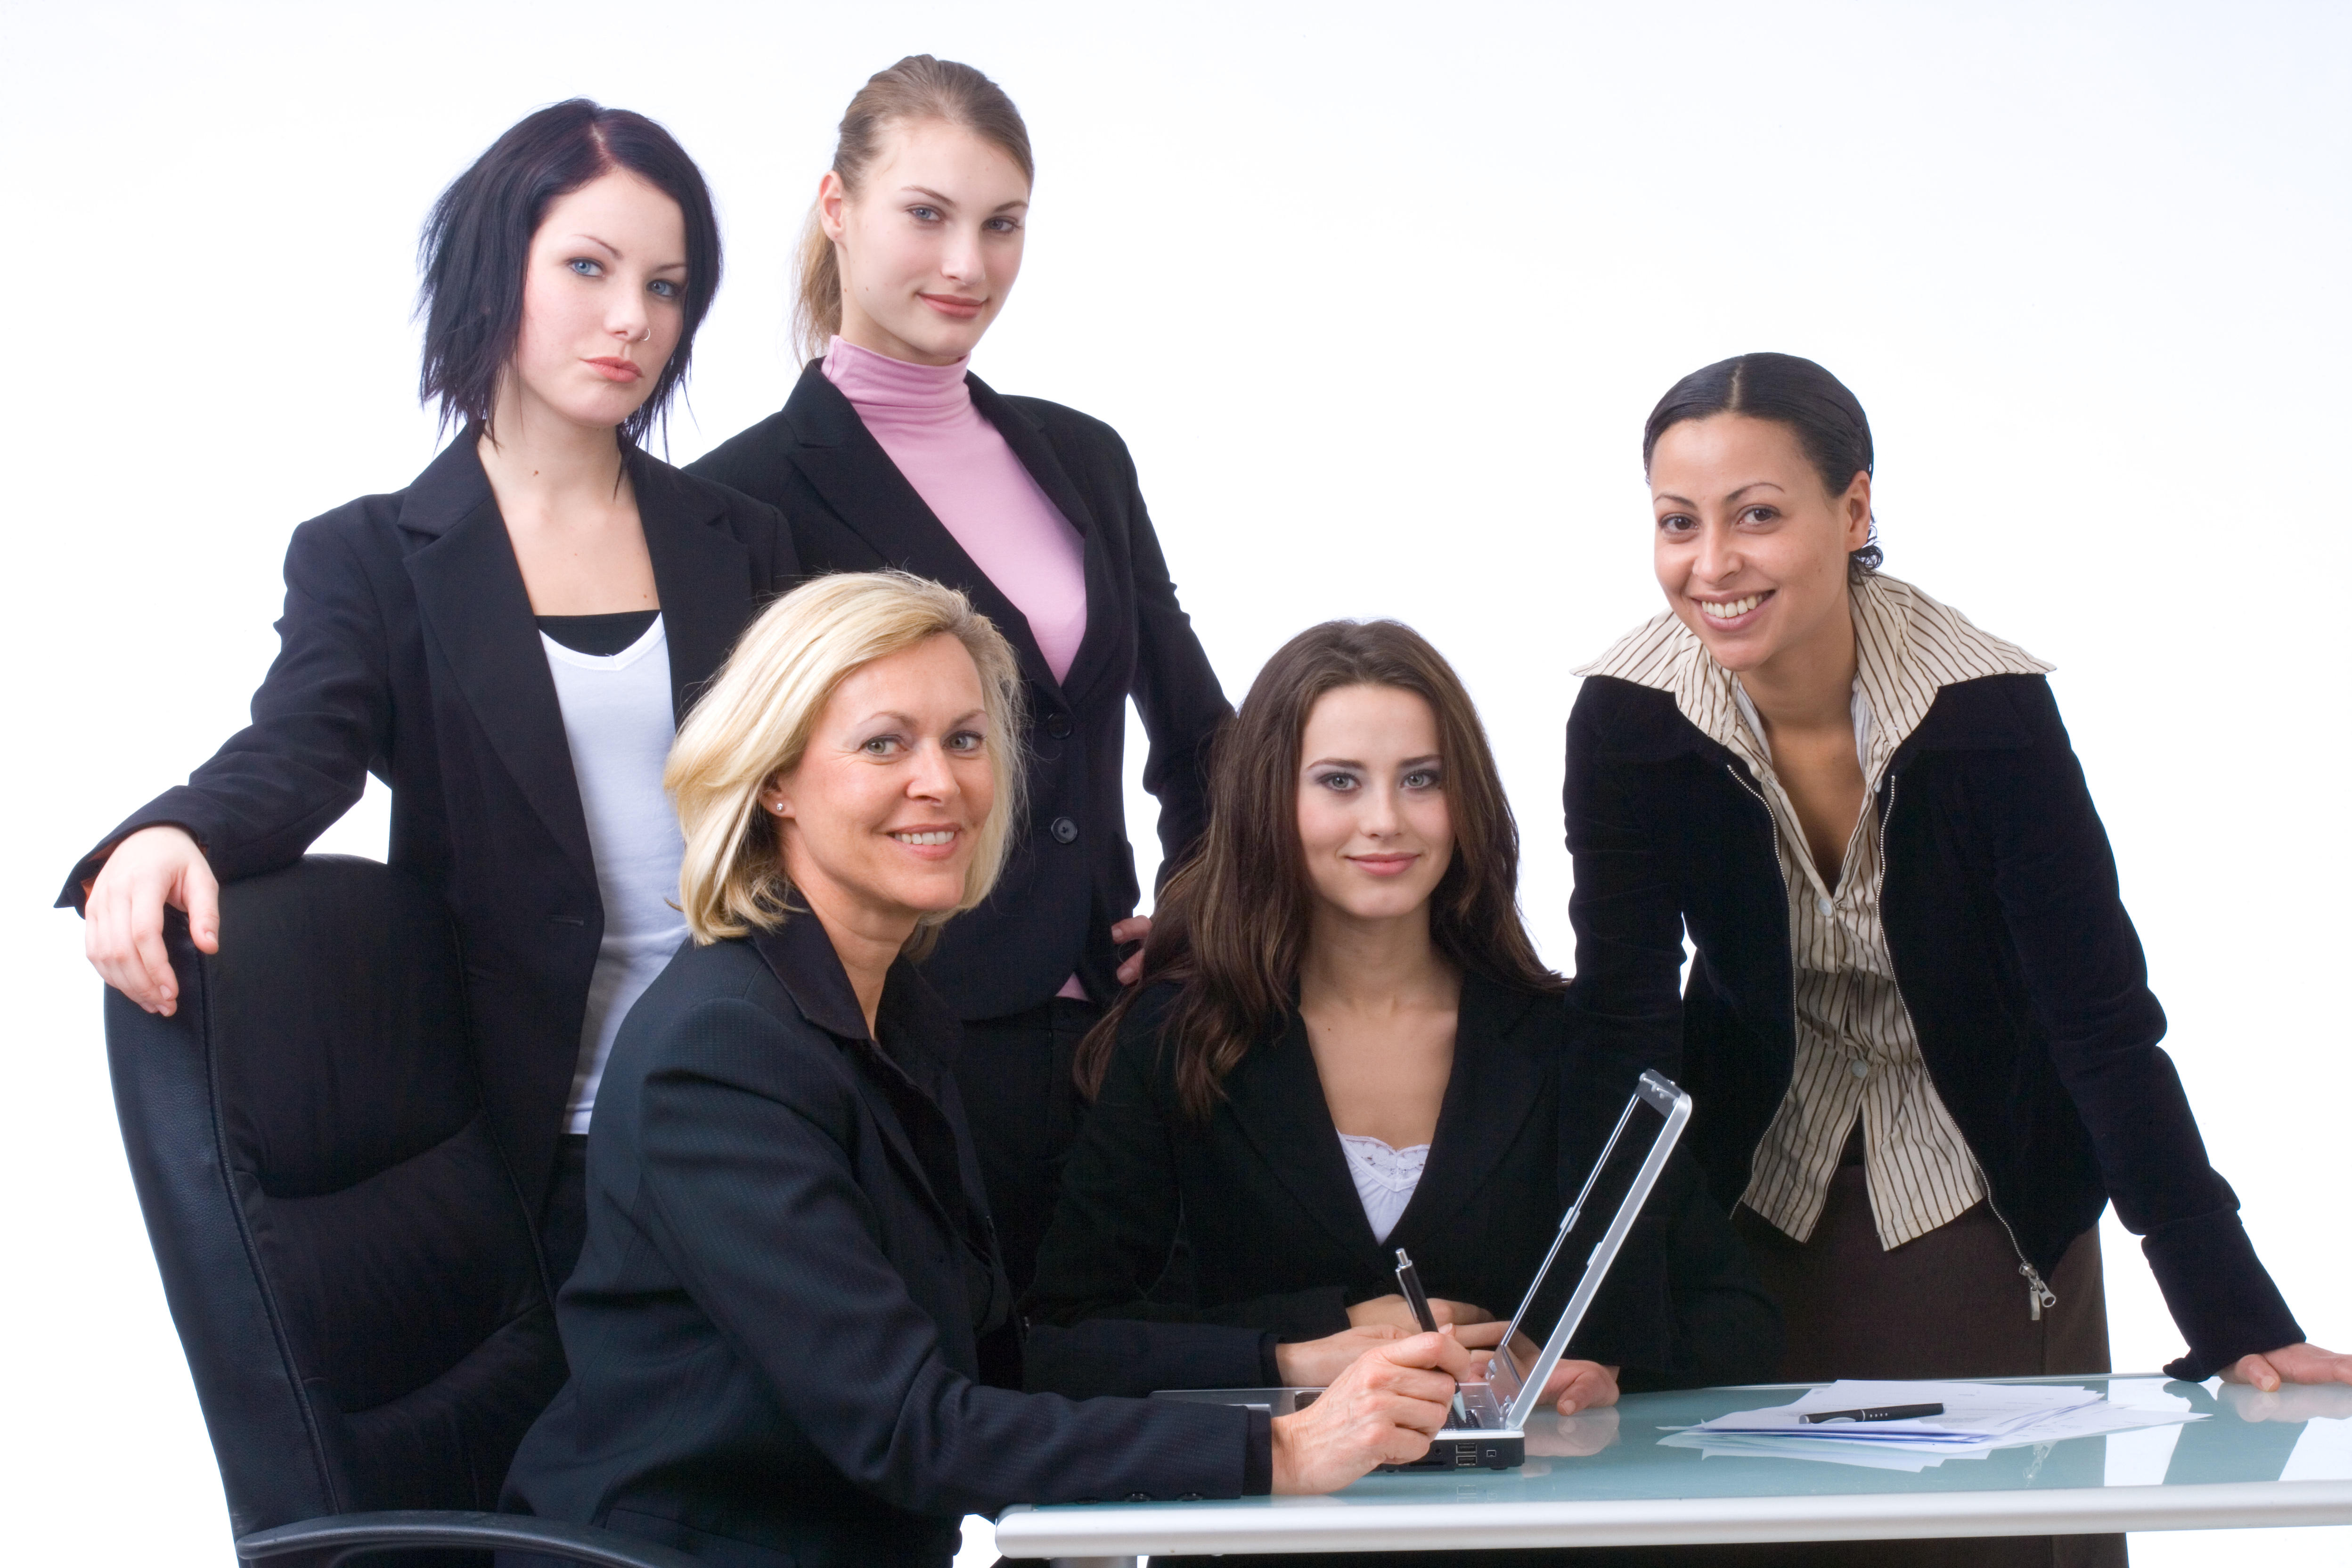 Indian Female Millinaries more concerned about #Career_Progression.